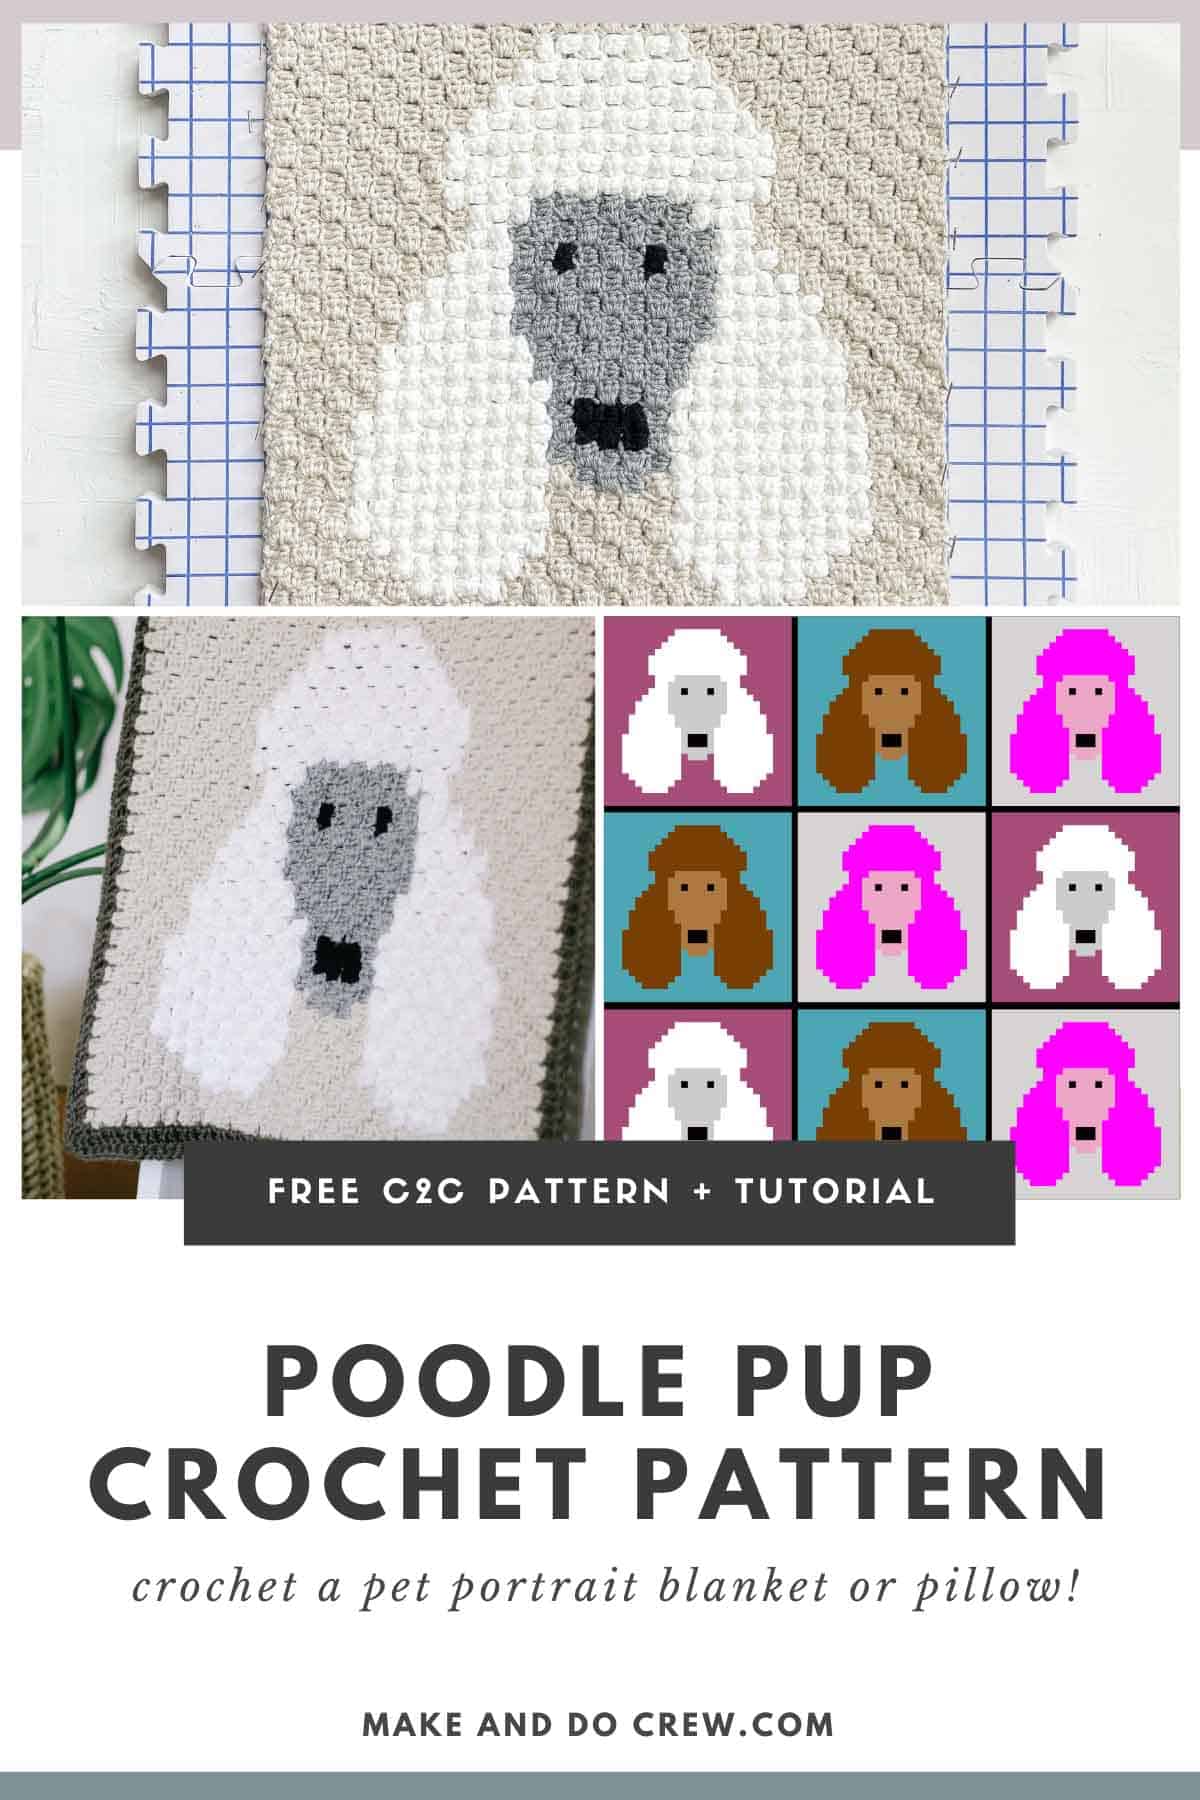 This image shows a free crochet pattern for a corner to corner crochet square featuring a gray and white Poodle dog face. These photos include a front image of the crochet square on a blocking board, a close up image of the dog square on a blanket ladder, and a pixilated version of the dog square repeating nine times.